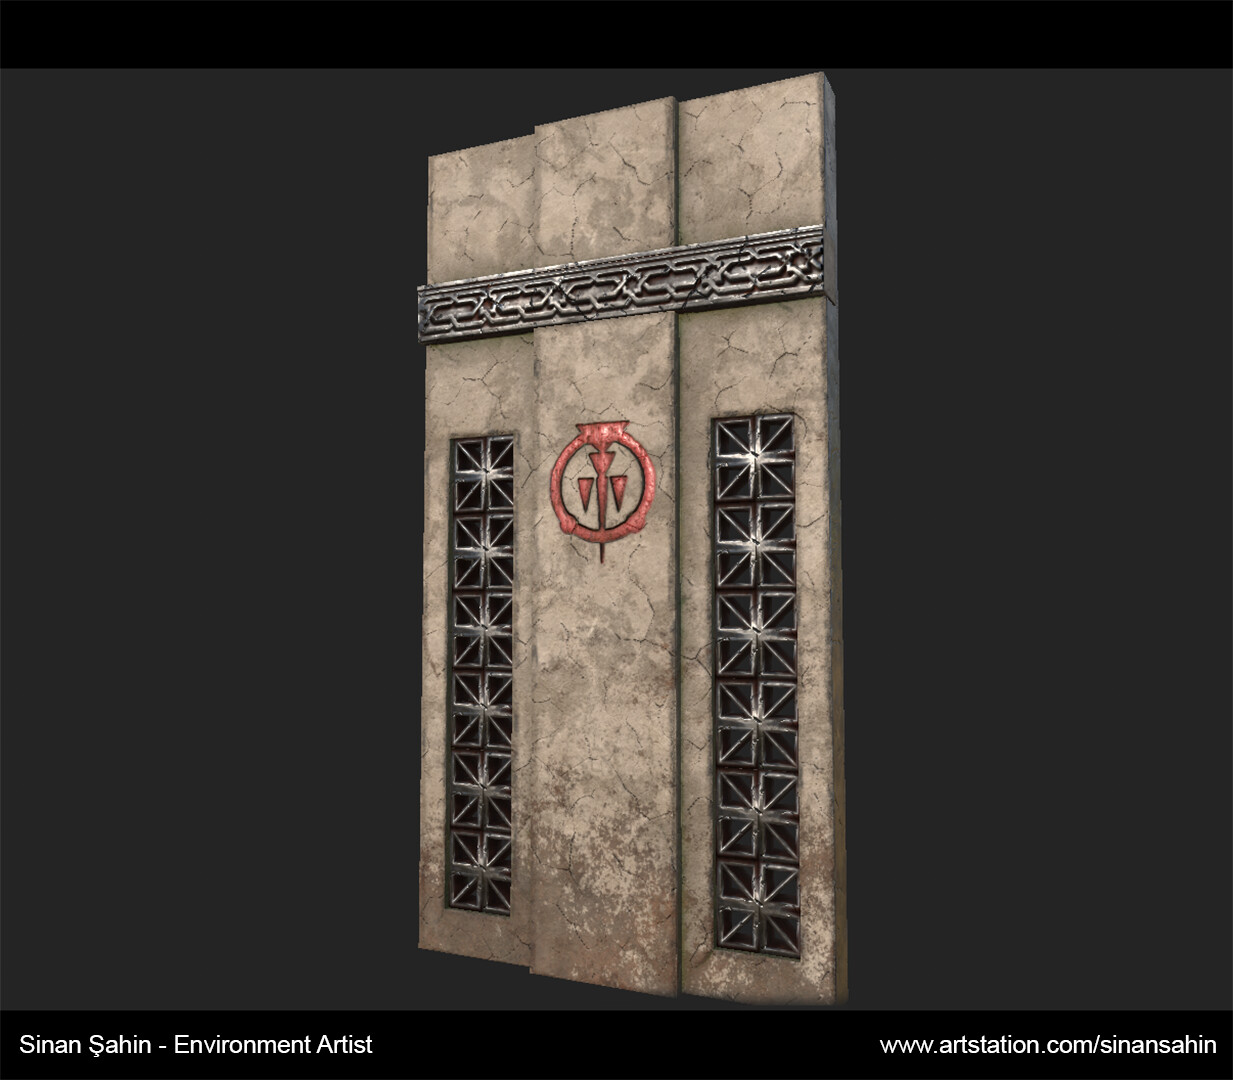 ArtStation - Prince of Persia: Warrior Within Remastered - Time Portal